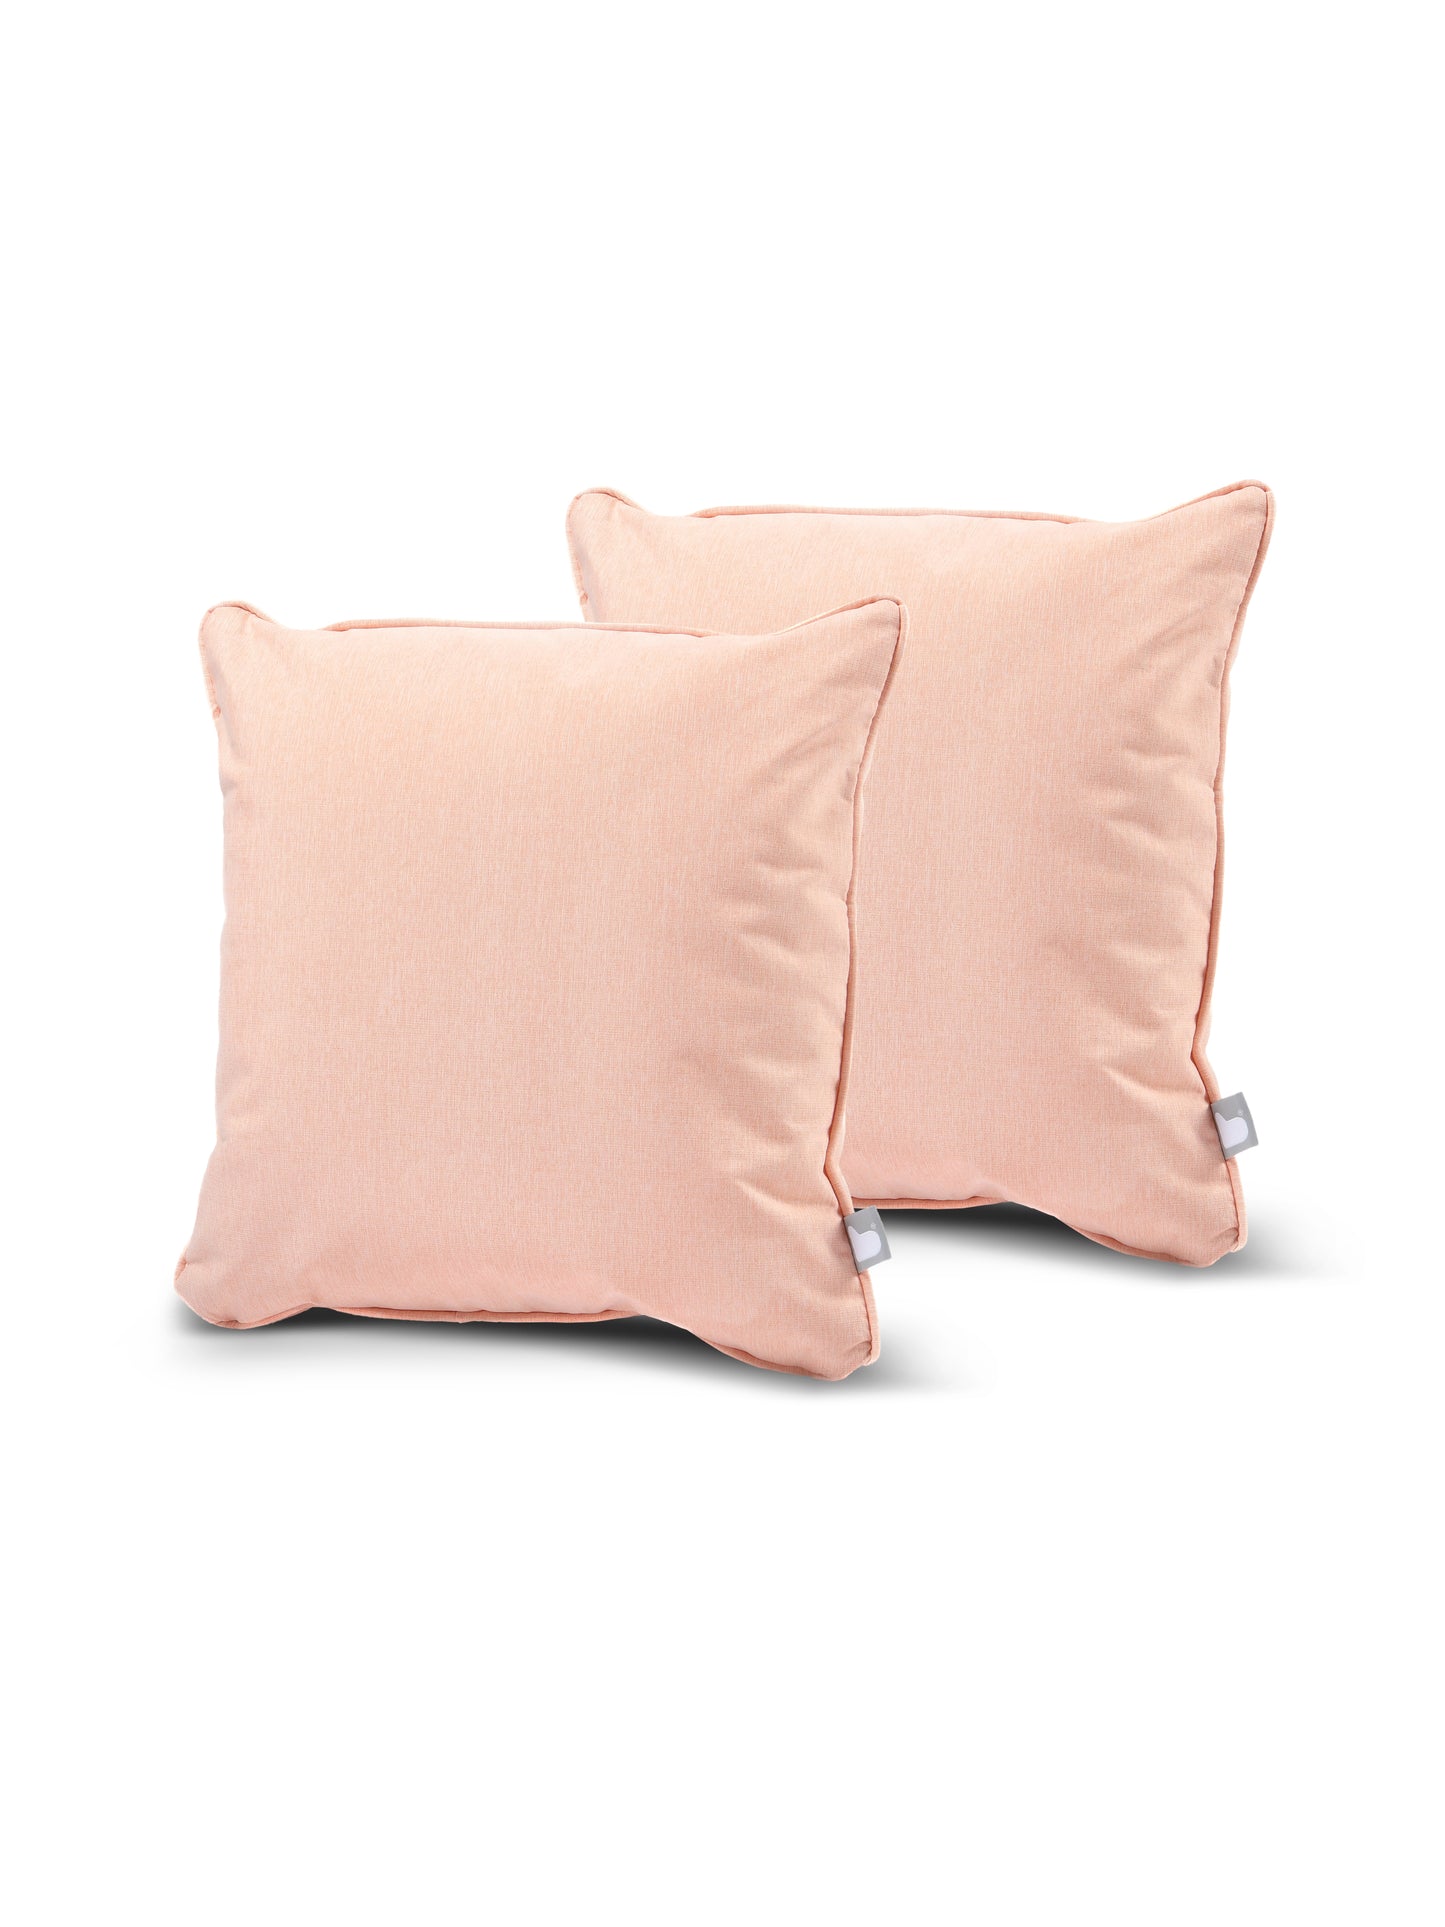 Two peach-colored square B Cushion Twin Pack Pastel Collection from Brisks with smooth, splash-proof fabric are placed against a white background. Each pillow has a small white tag on one of the bottom corners. The pillows have a subtle sheen and appear plush and comfortable, perfect for adding elegance to your decor.